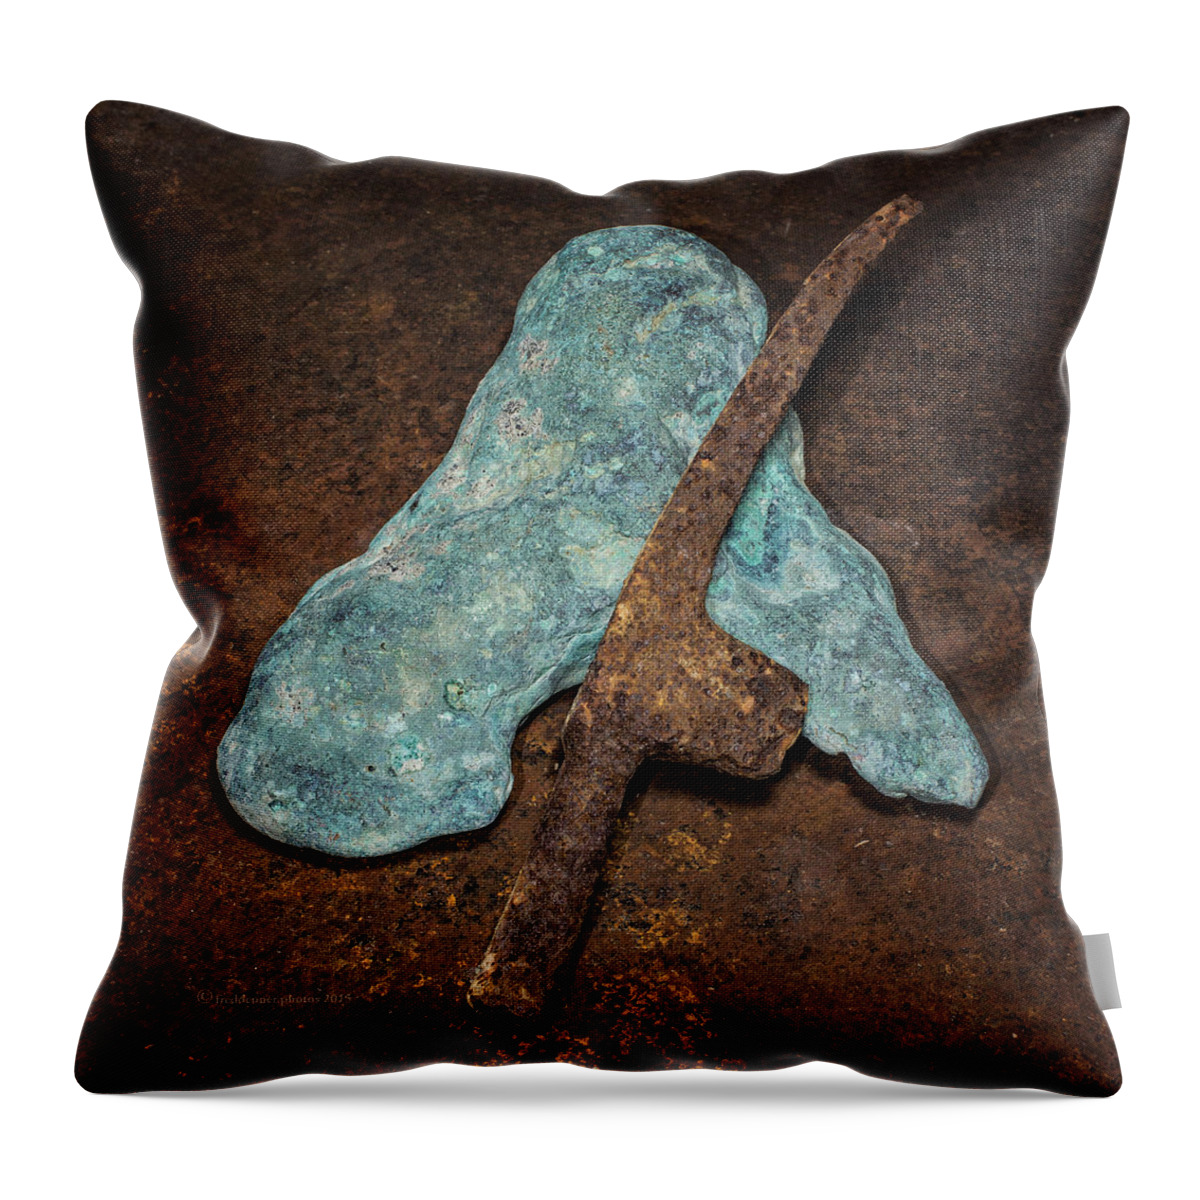 Copper Throw Pillow featuring the photograph Copper Nugget Rock Hammer by Fred Denner